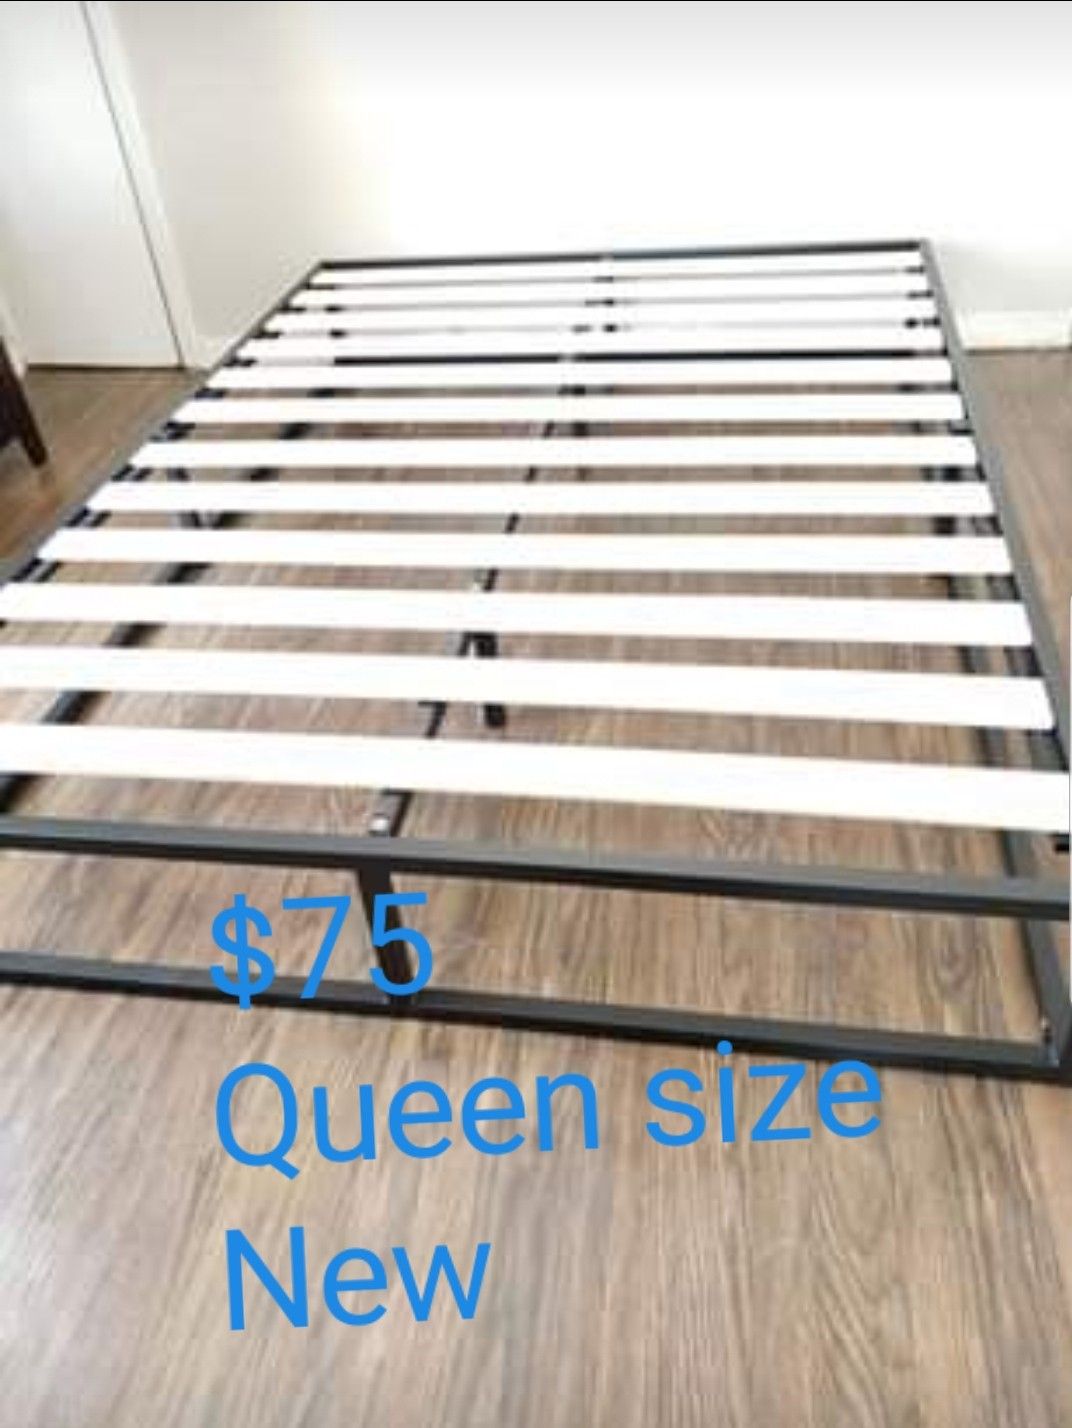 Platform bed frame Queen size. Brand new. Free delivery in Stockton. $75